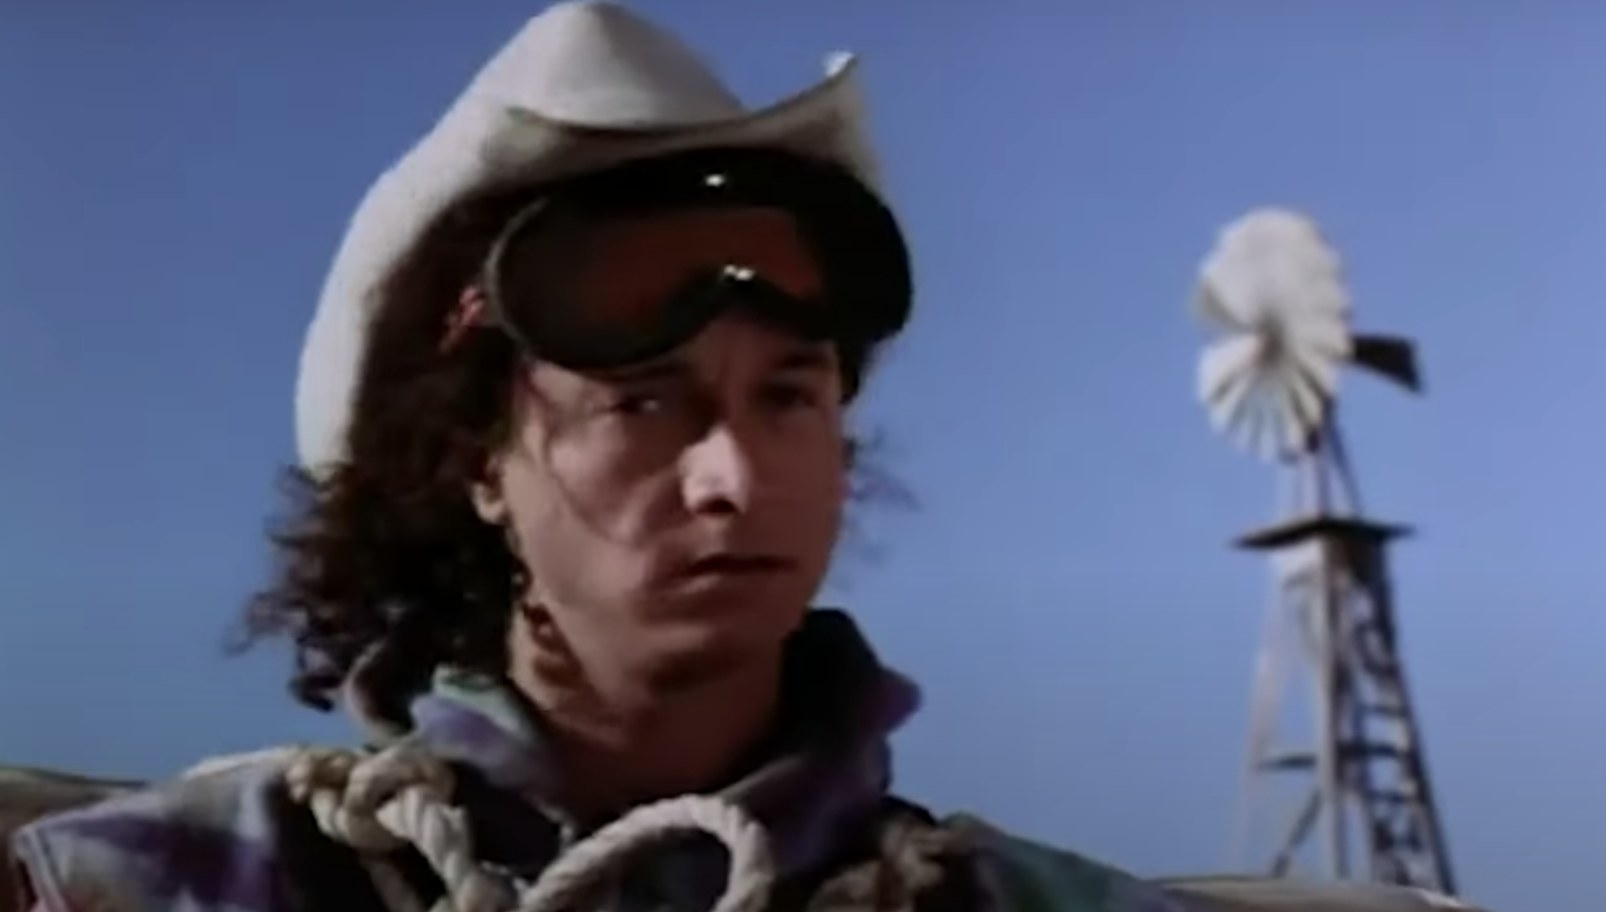 Pauly Shoree wears cowboy hats and goggles as his character.